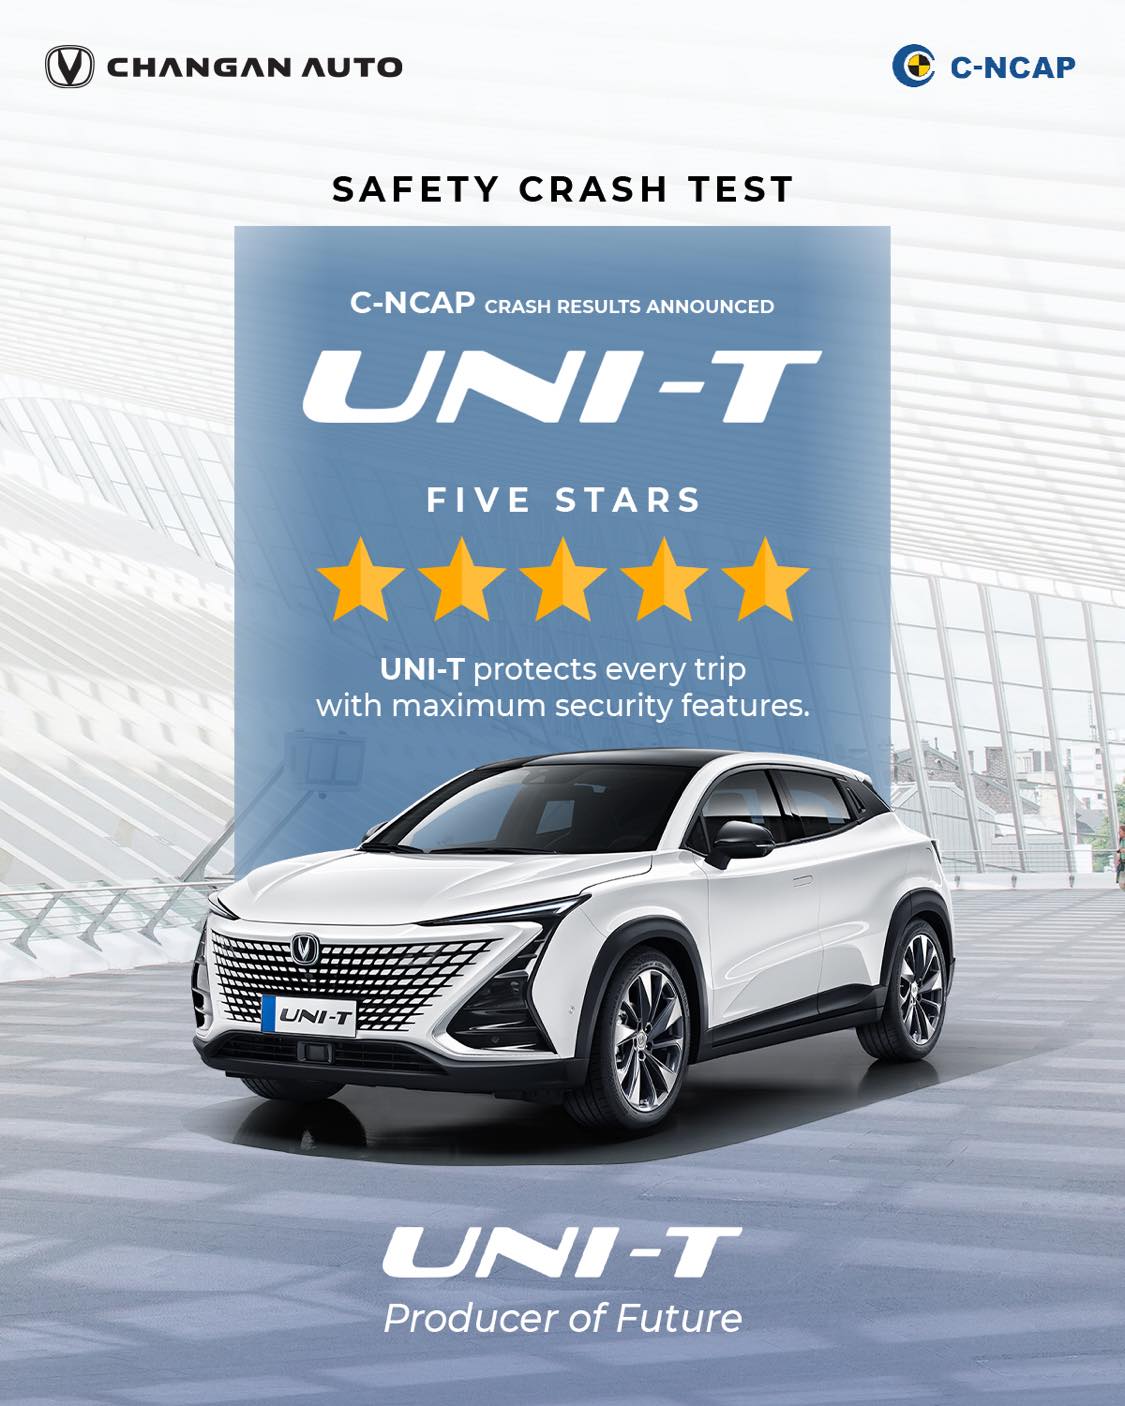 Changan UNI-T receives 5 star safety rating in CNCAP